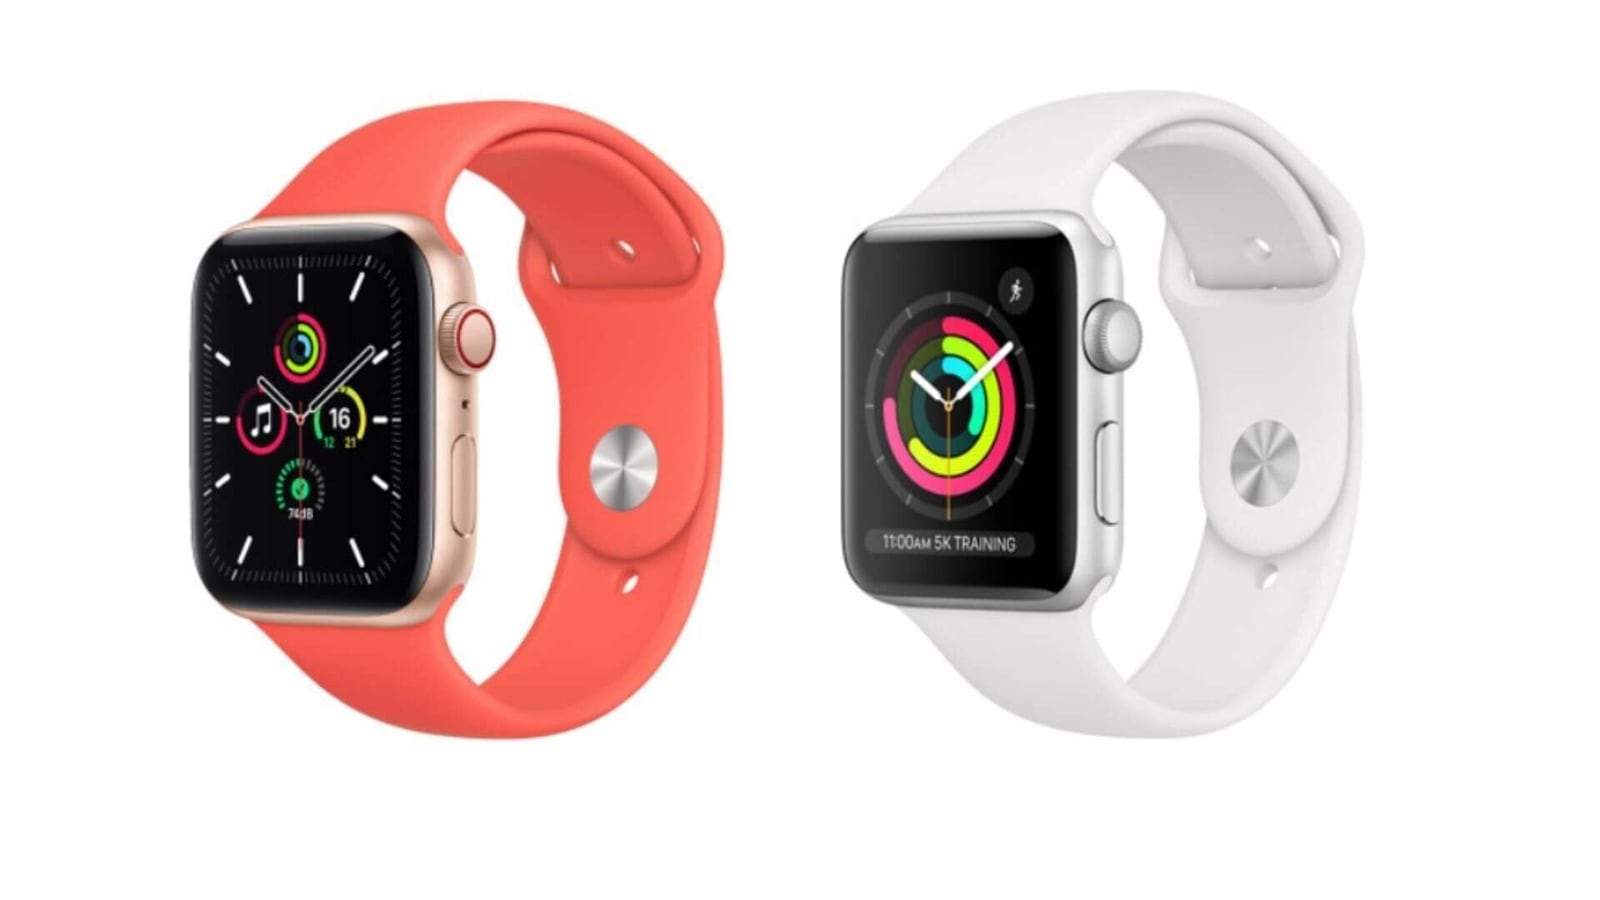 Apple Watch SE vs Series 3: Which one should you go for